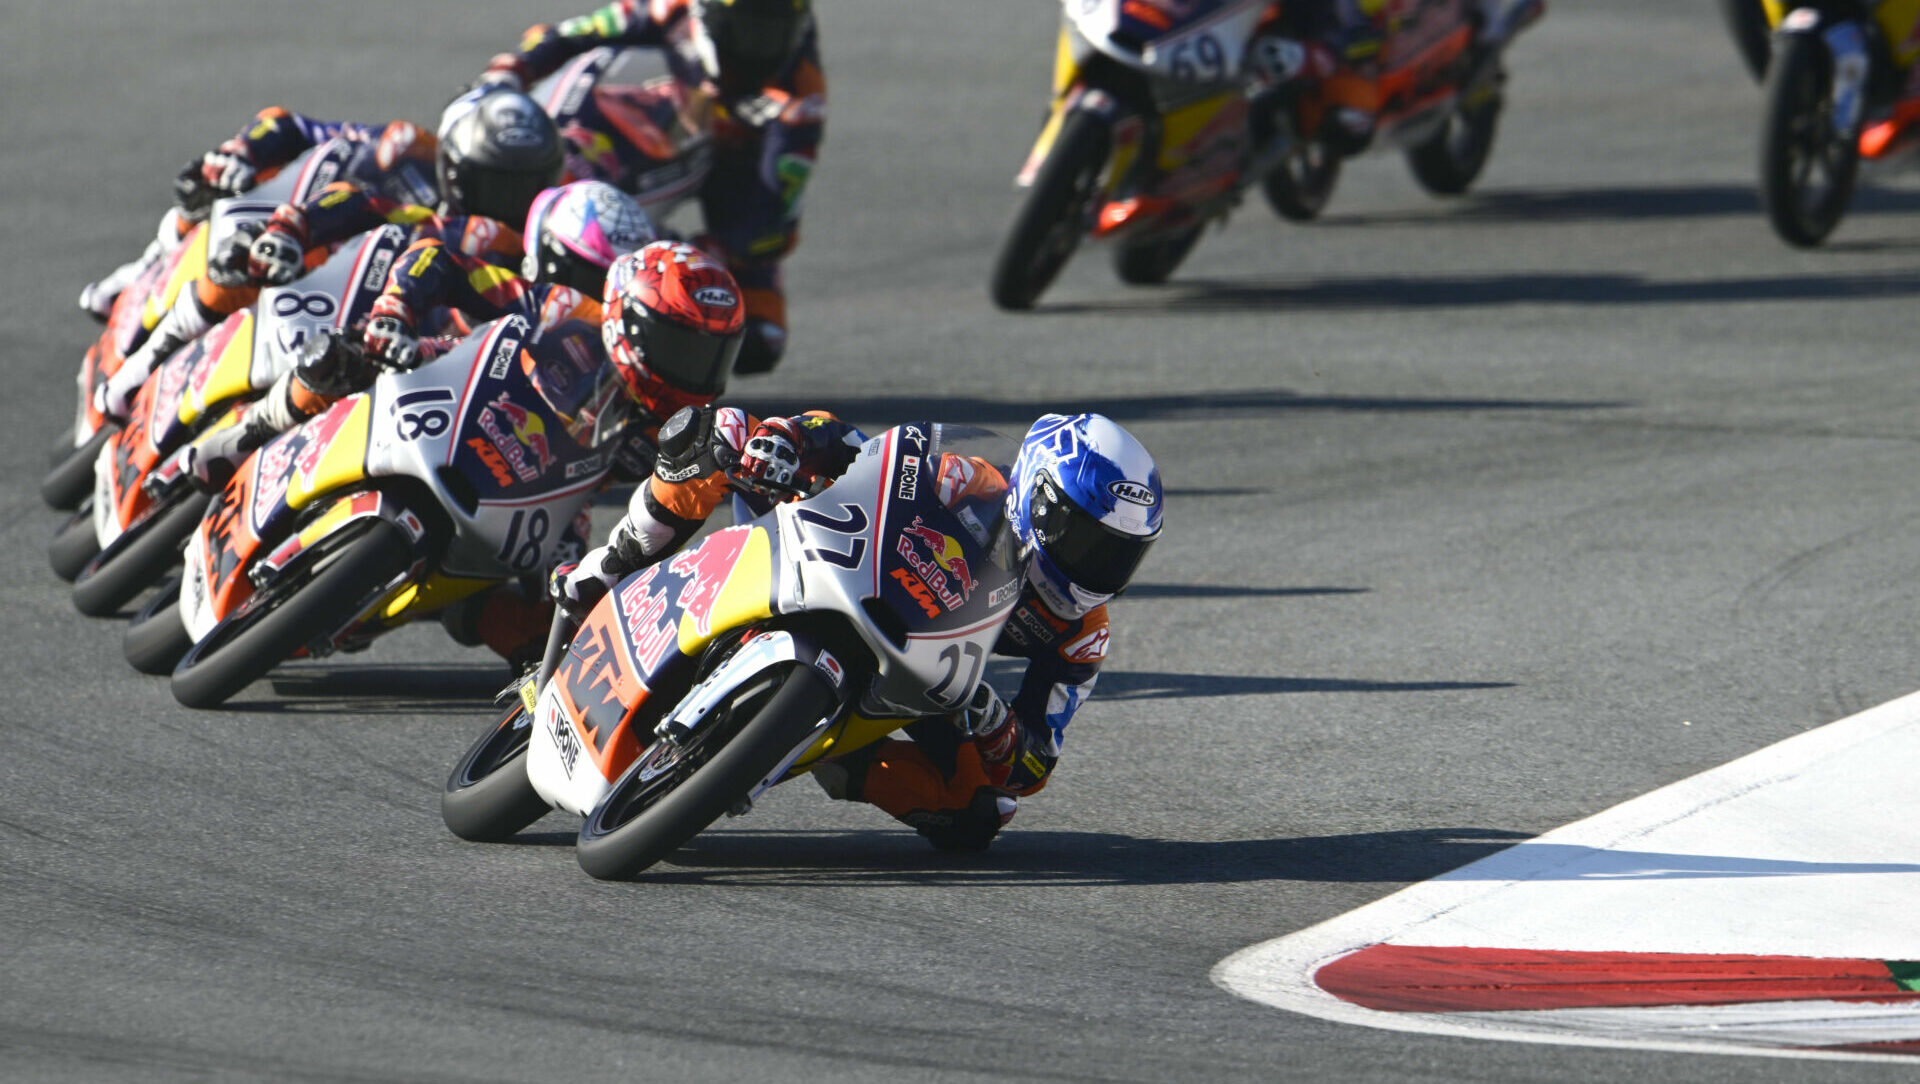 Red Bull Motogp Rookies Cup Race Two Results From Red Bull Ring Roadracing World Magazine